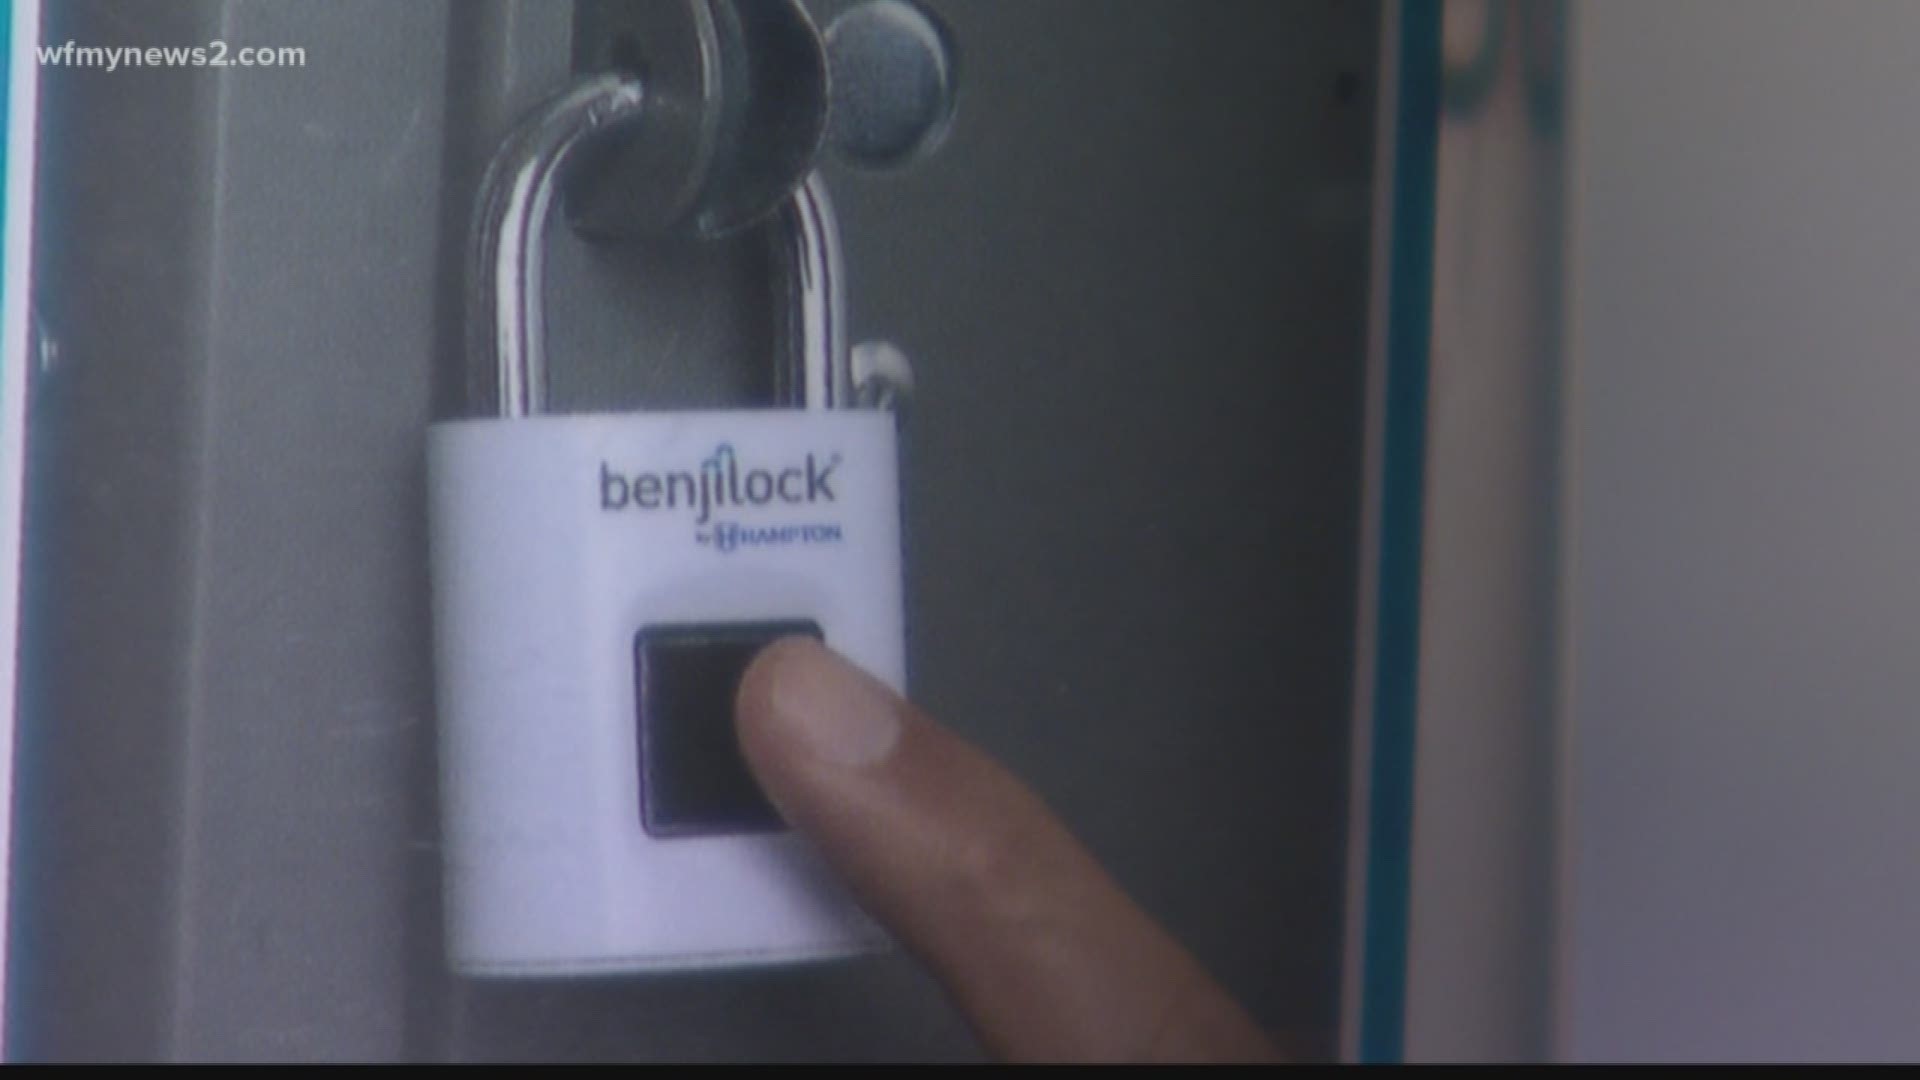 The makers of the Benjilock say they can make forgetting your key a thing of the past.